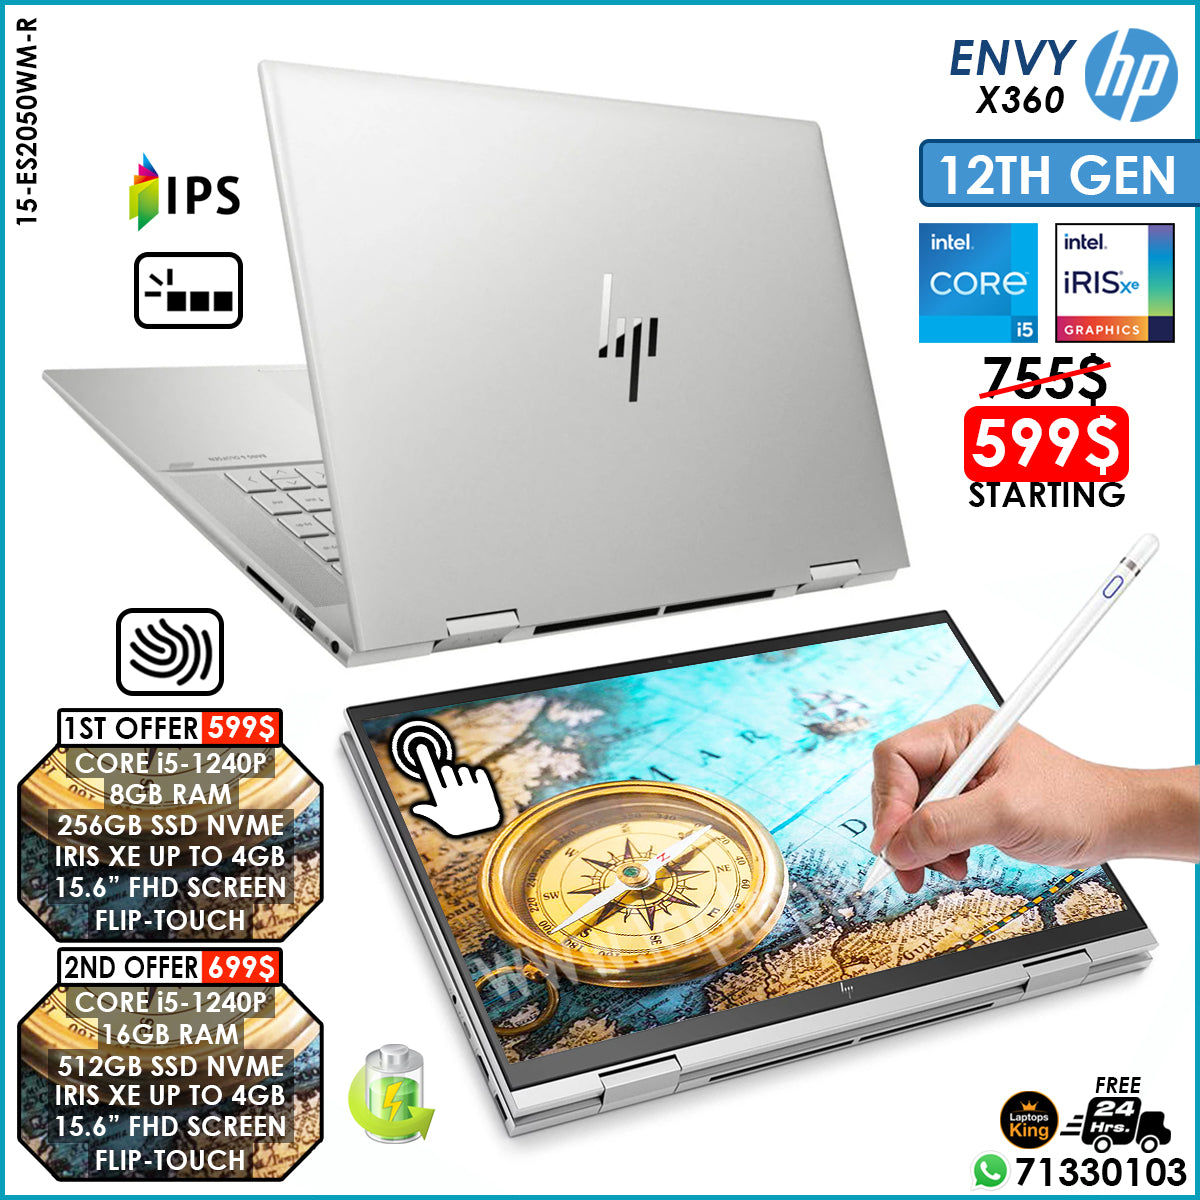 HP Envy X360 15-ES2050WM-R 2in1 Core i5-1240p Iris Xe 15.6" Fhd Ips Laptop Offers (New OB)